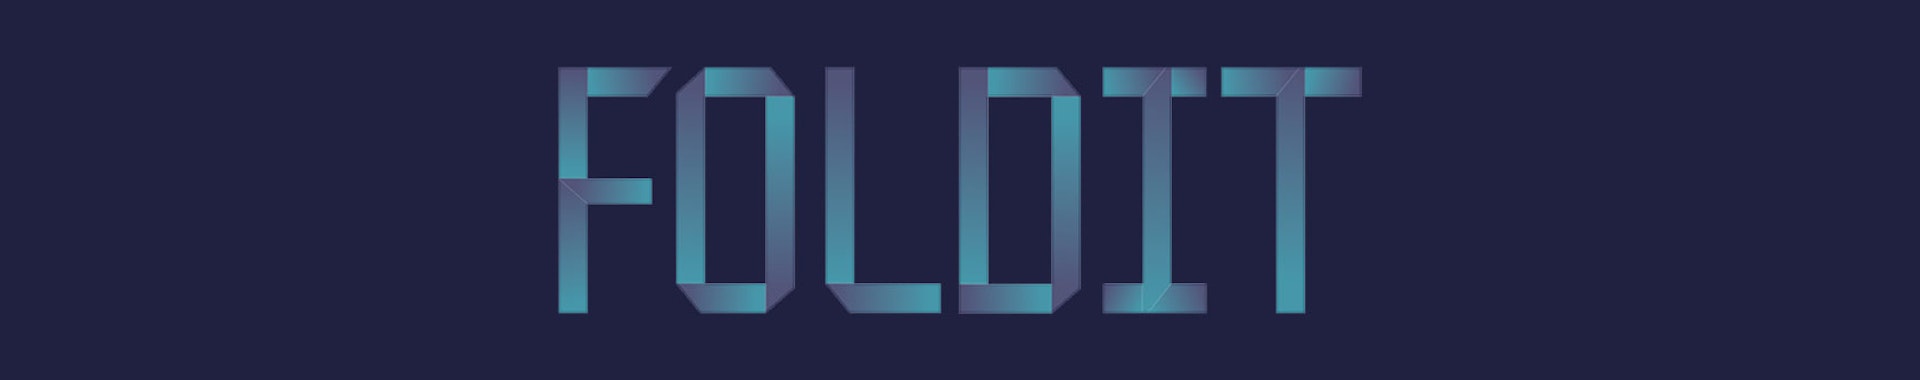 Color variable font Foldit in blue and teal with paper folds in font, background is dark blue